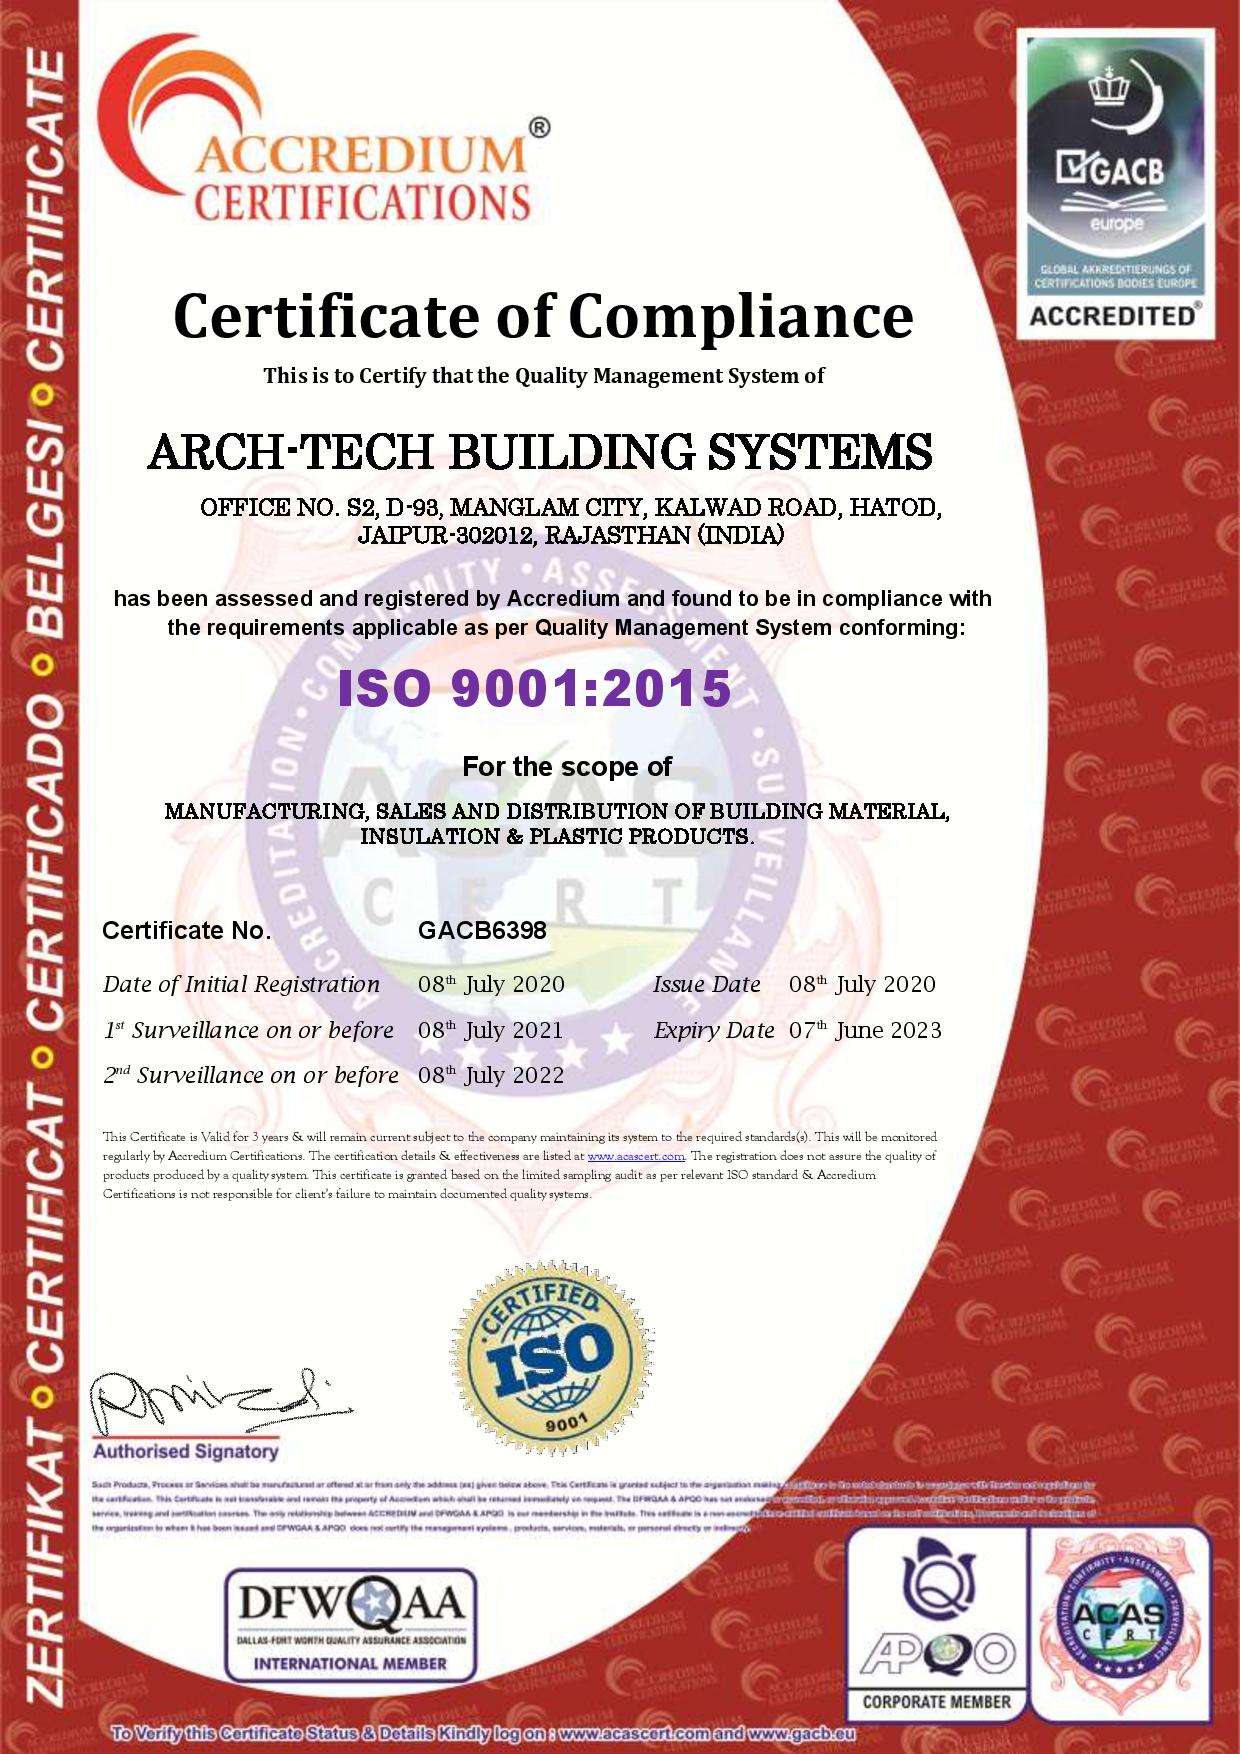 GACB6398-ARCH-TECH-BUILDING-SYSTEMS-ISO-9001